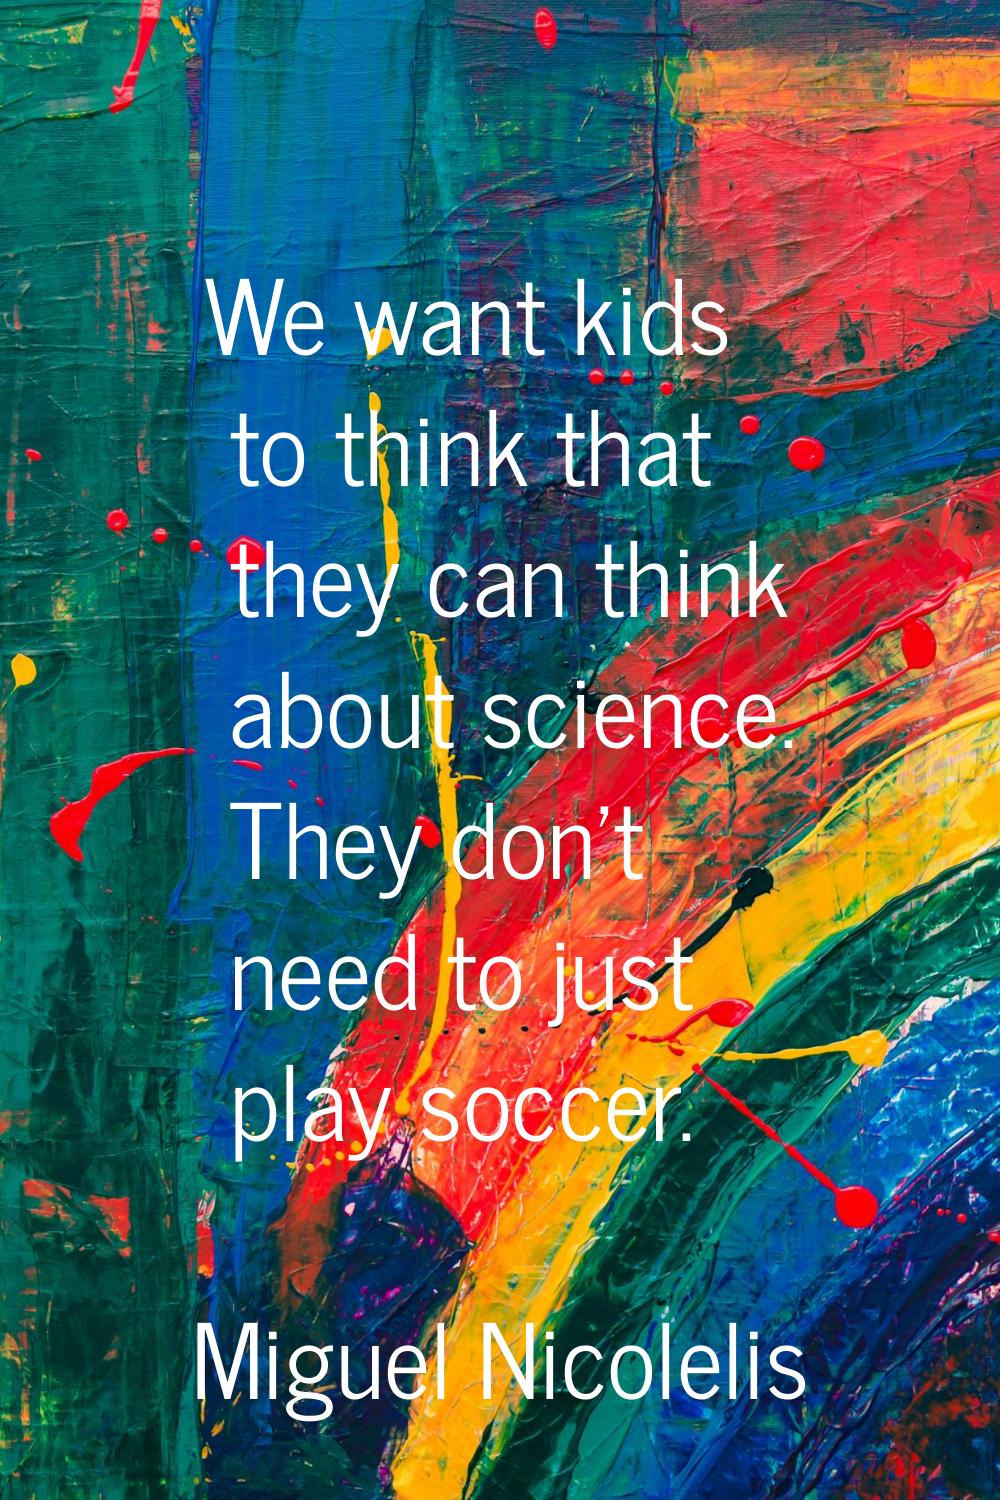 We want kids to think that they can think about science. They don't need to just play soccer.